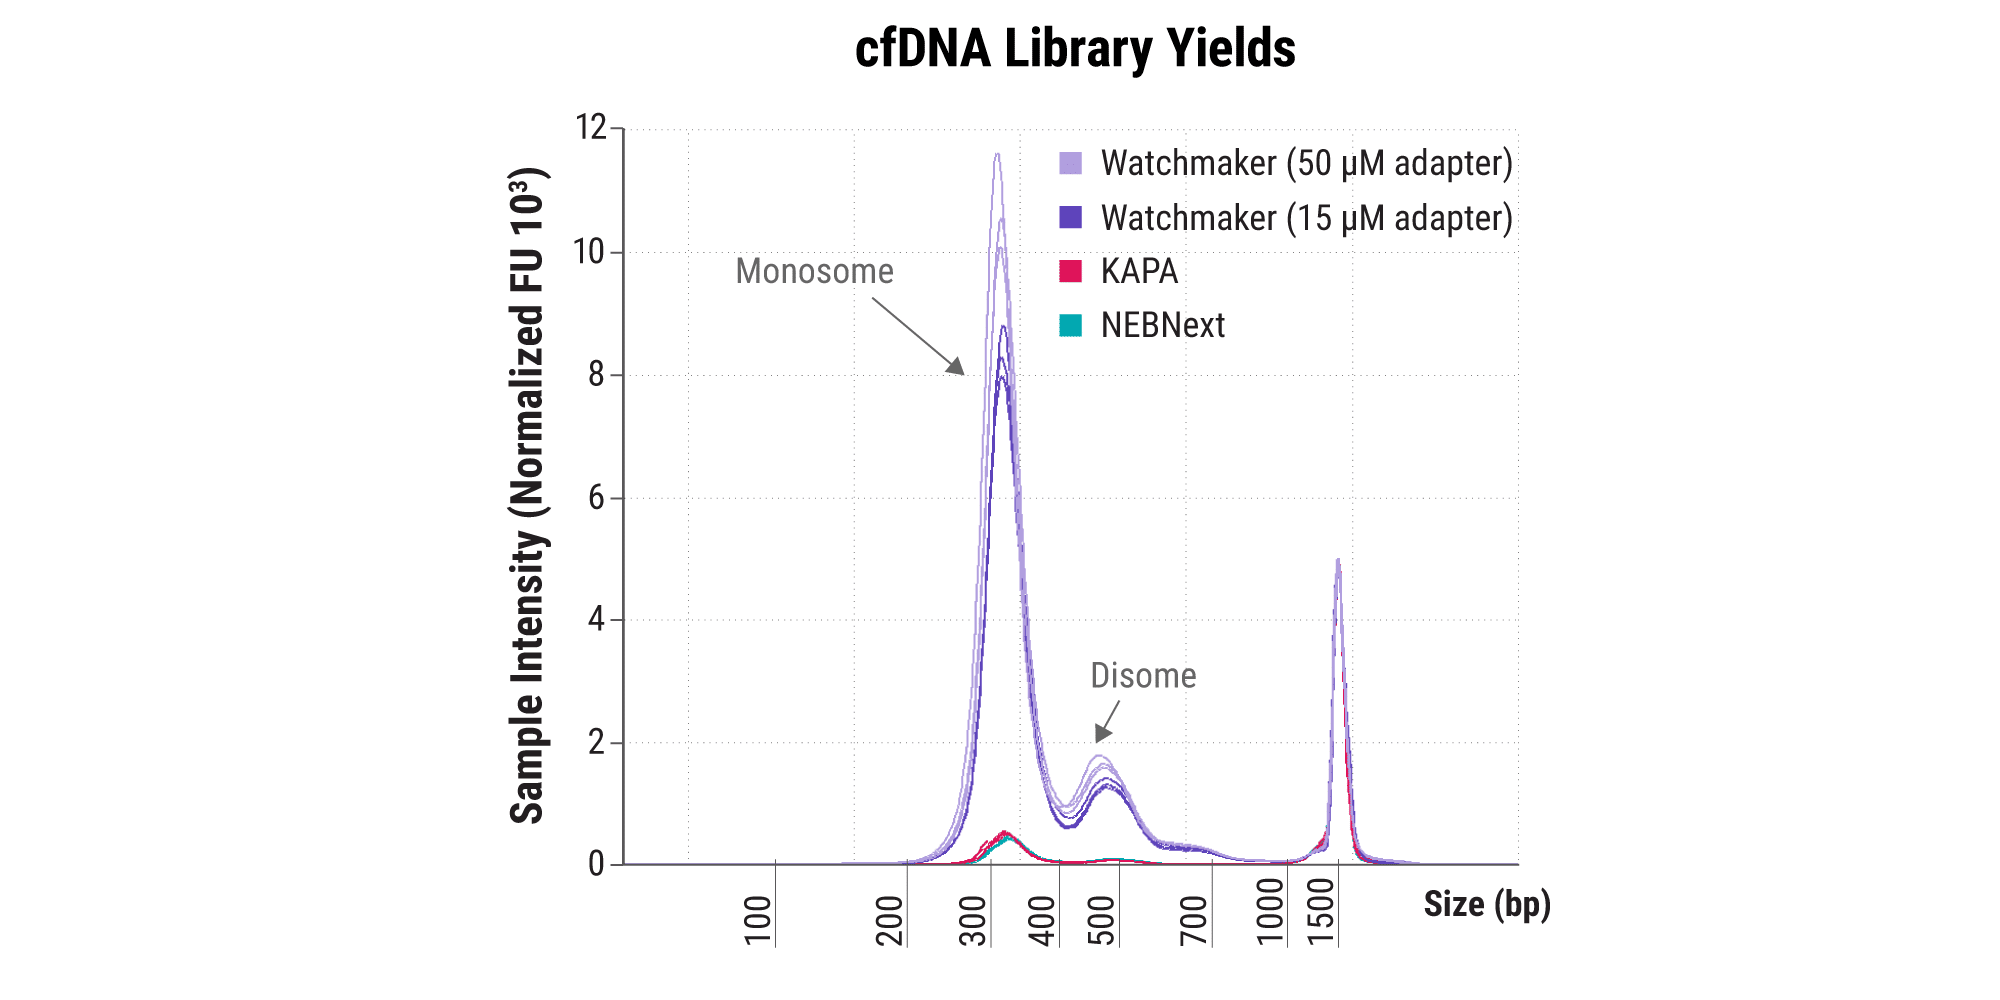 Figure 4A. Improve yields (and subsequent sequence coverage) with cfDNA. Final library traces for libraries prepared in triplicate using 1 ng of Isopure cfDNA with the Watchmaker DNA Library Prep Kit, KAPA HyperPrep Kit, or NEBNext Ultra II DNA Library Prep Kit according to each manufacturer’s recommended protocol. Watchmaker library yields were 9-fold higher compared to other solutions enabling better resolution of the disome peak. Additional optimization with increased adapter concentration further improved yields by 20 - 25% with no adapter-dimer formation.